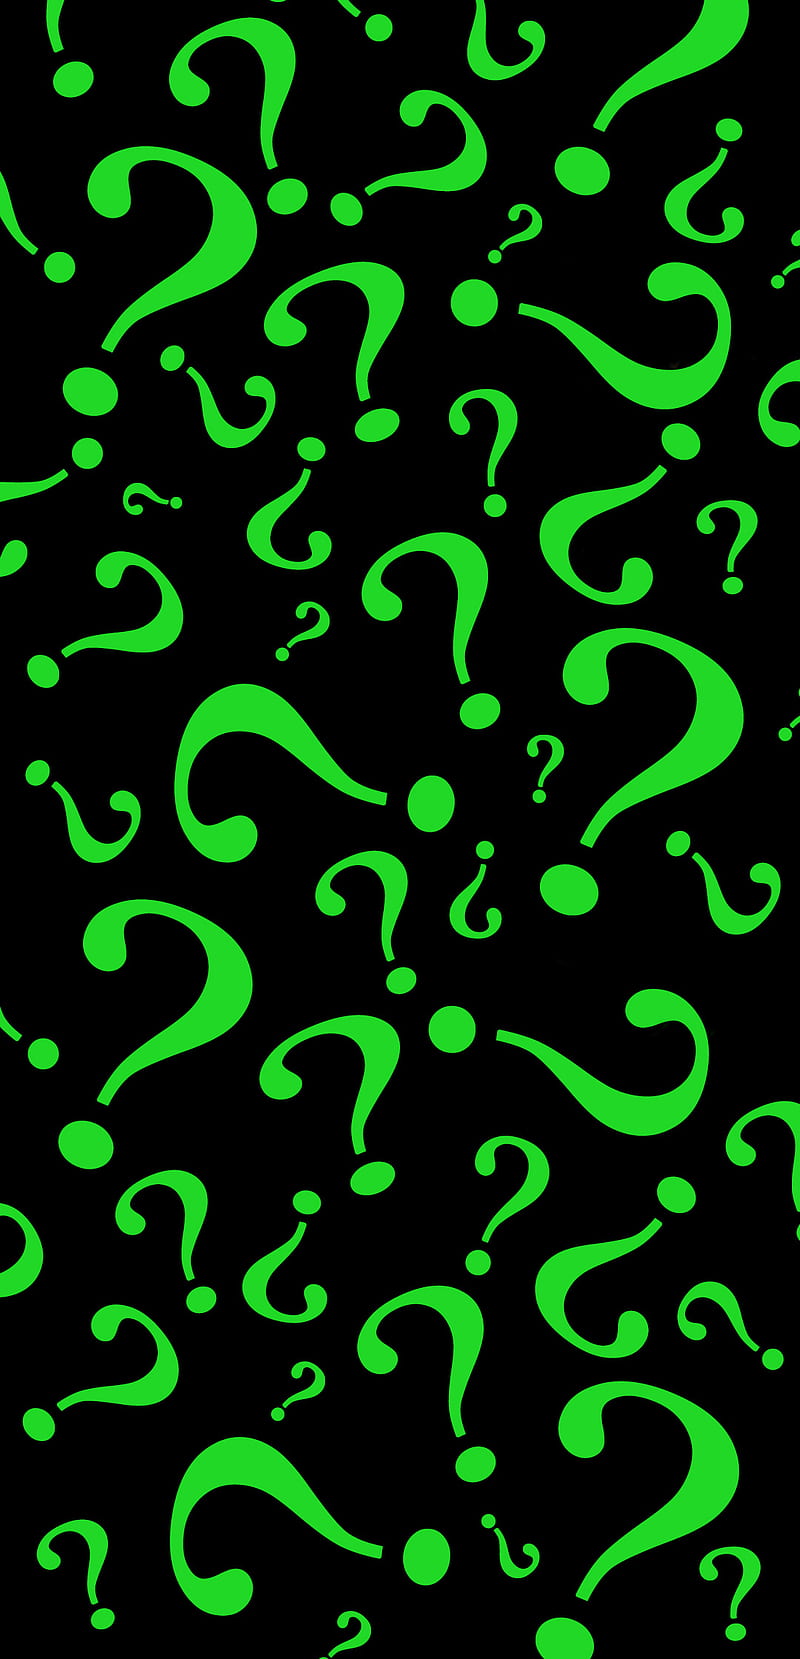 1000 Free Question Mark  Question Images  Pixabay